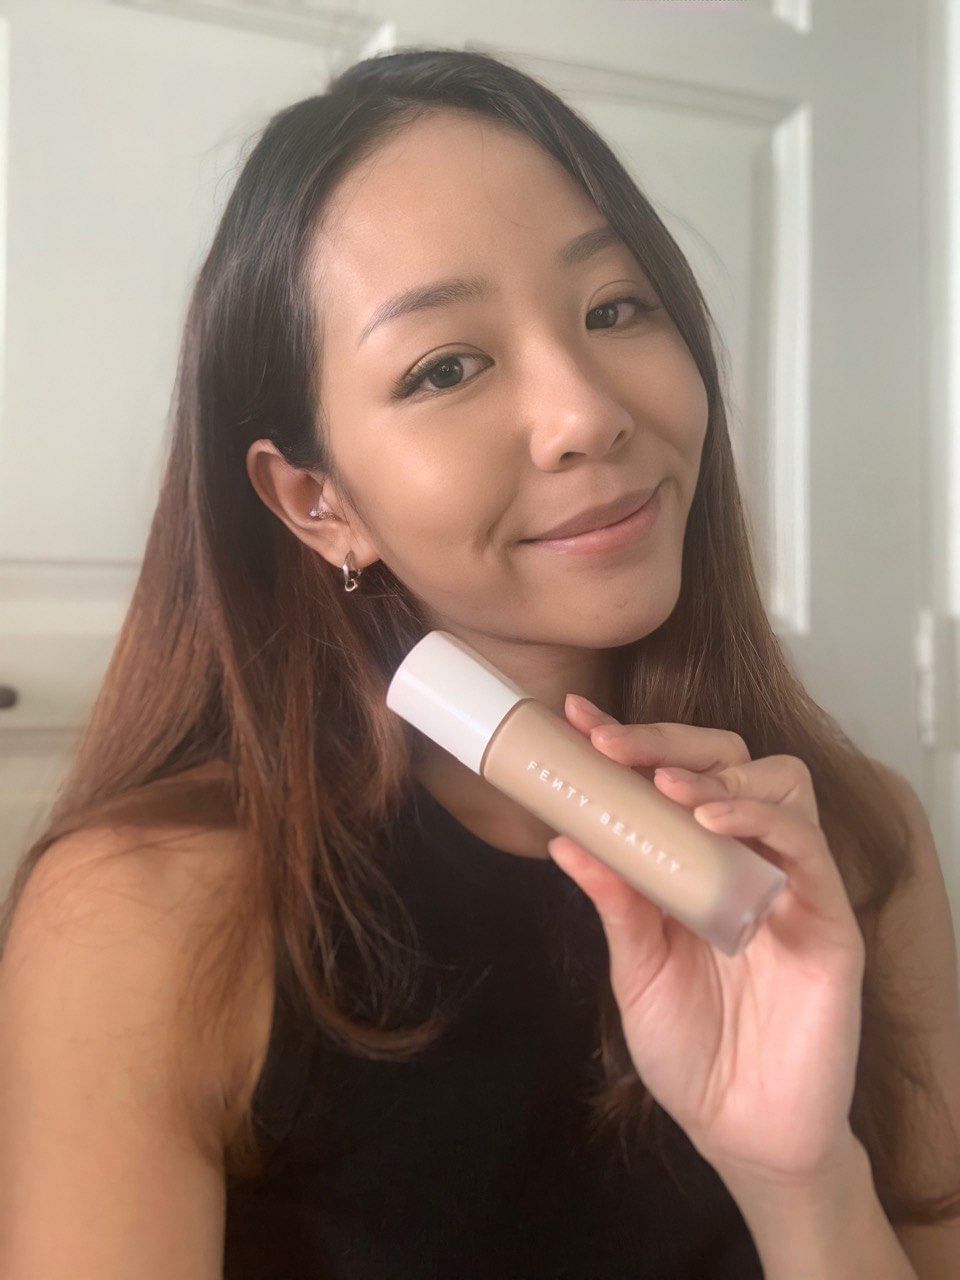 Fenty Beauty's Soft Matte Foundation Gave My Skin New Life in the Georgia  Heat